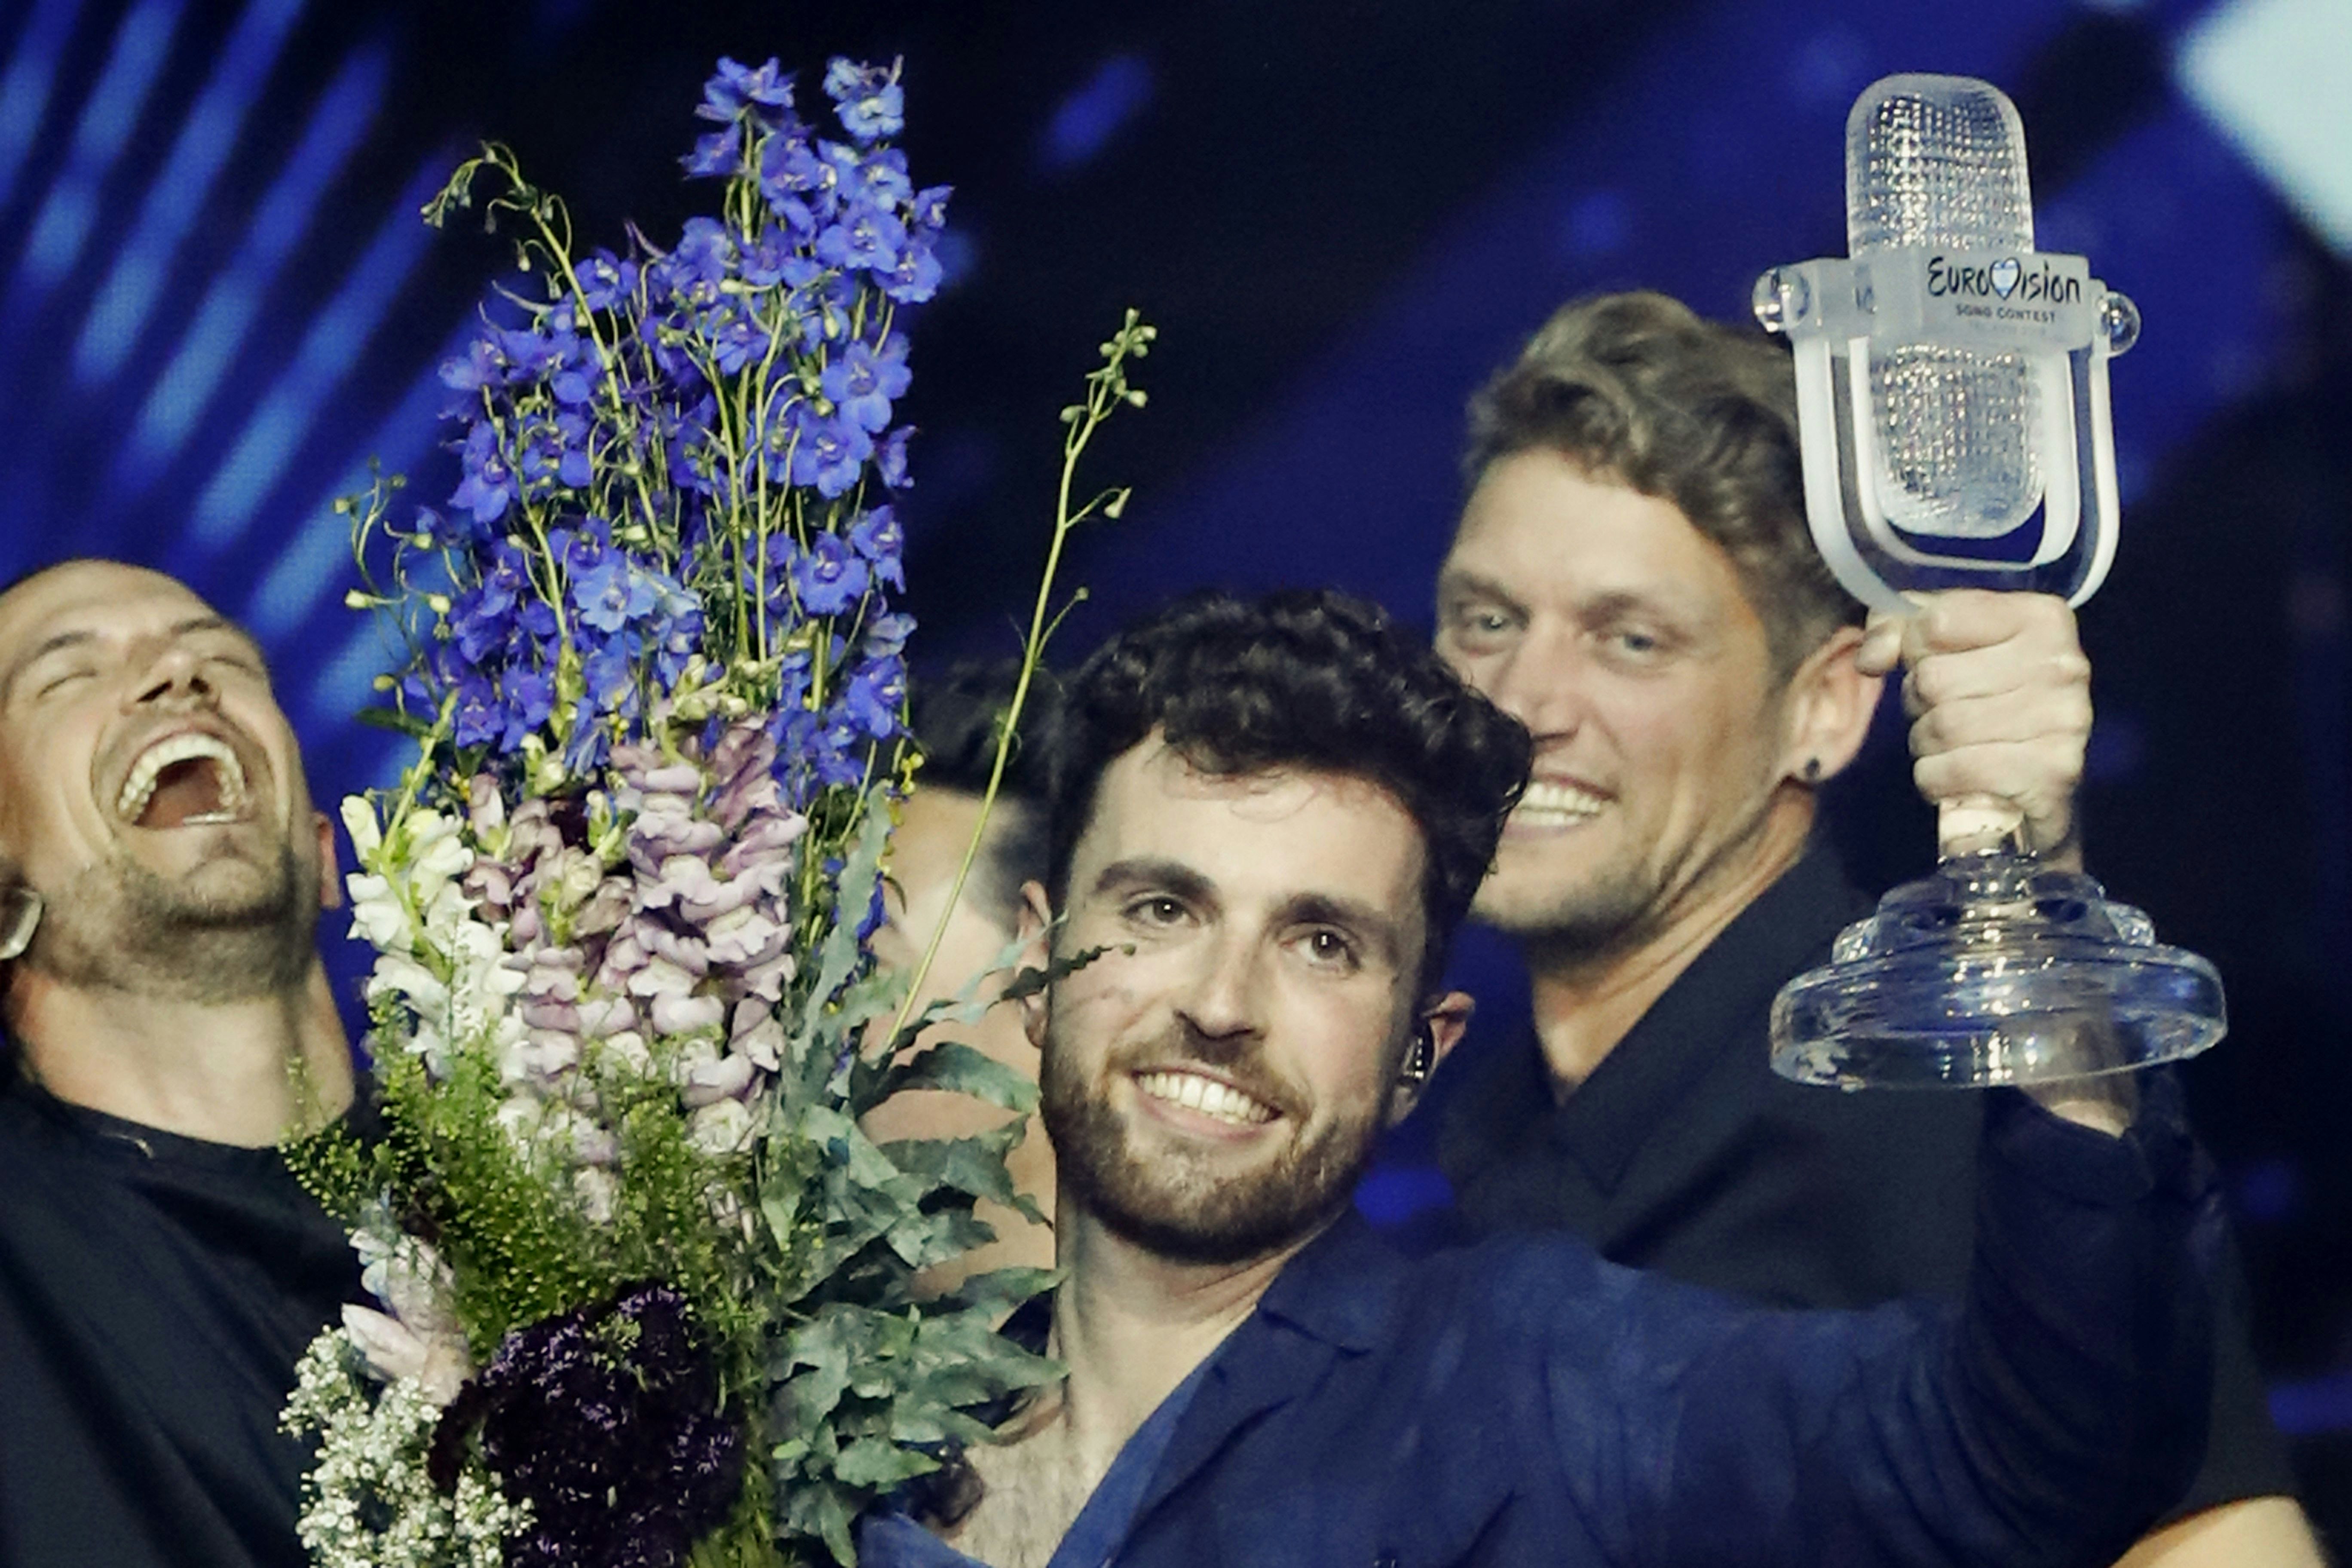 Duncan Laurence clutches a trophy and flowers as Eurovision winner for the Netherlands in 2019